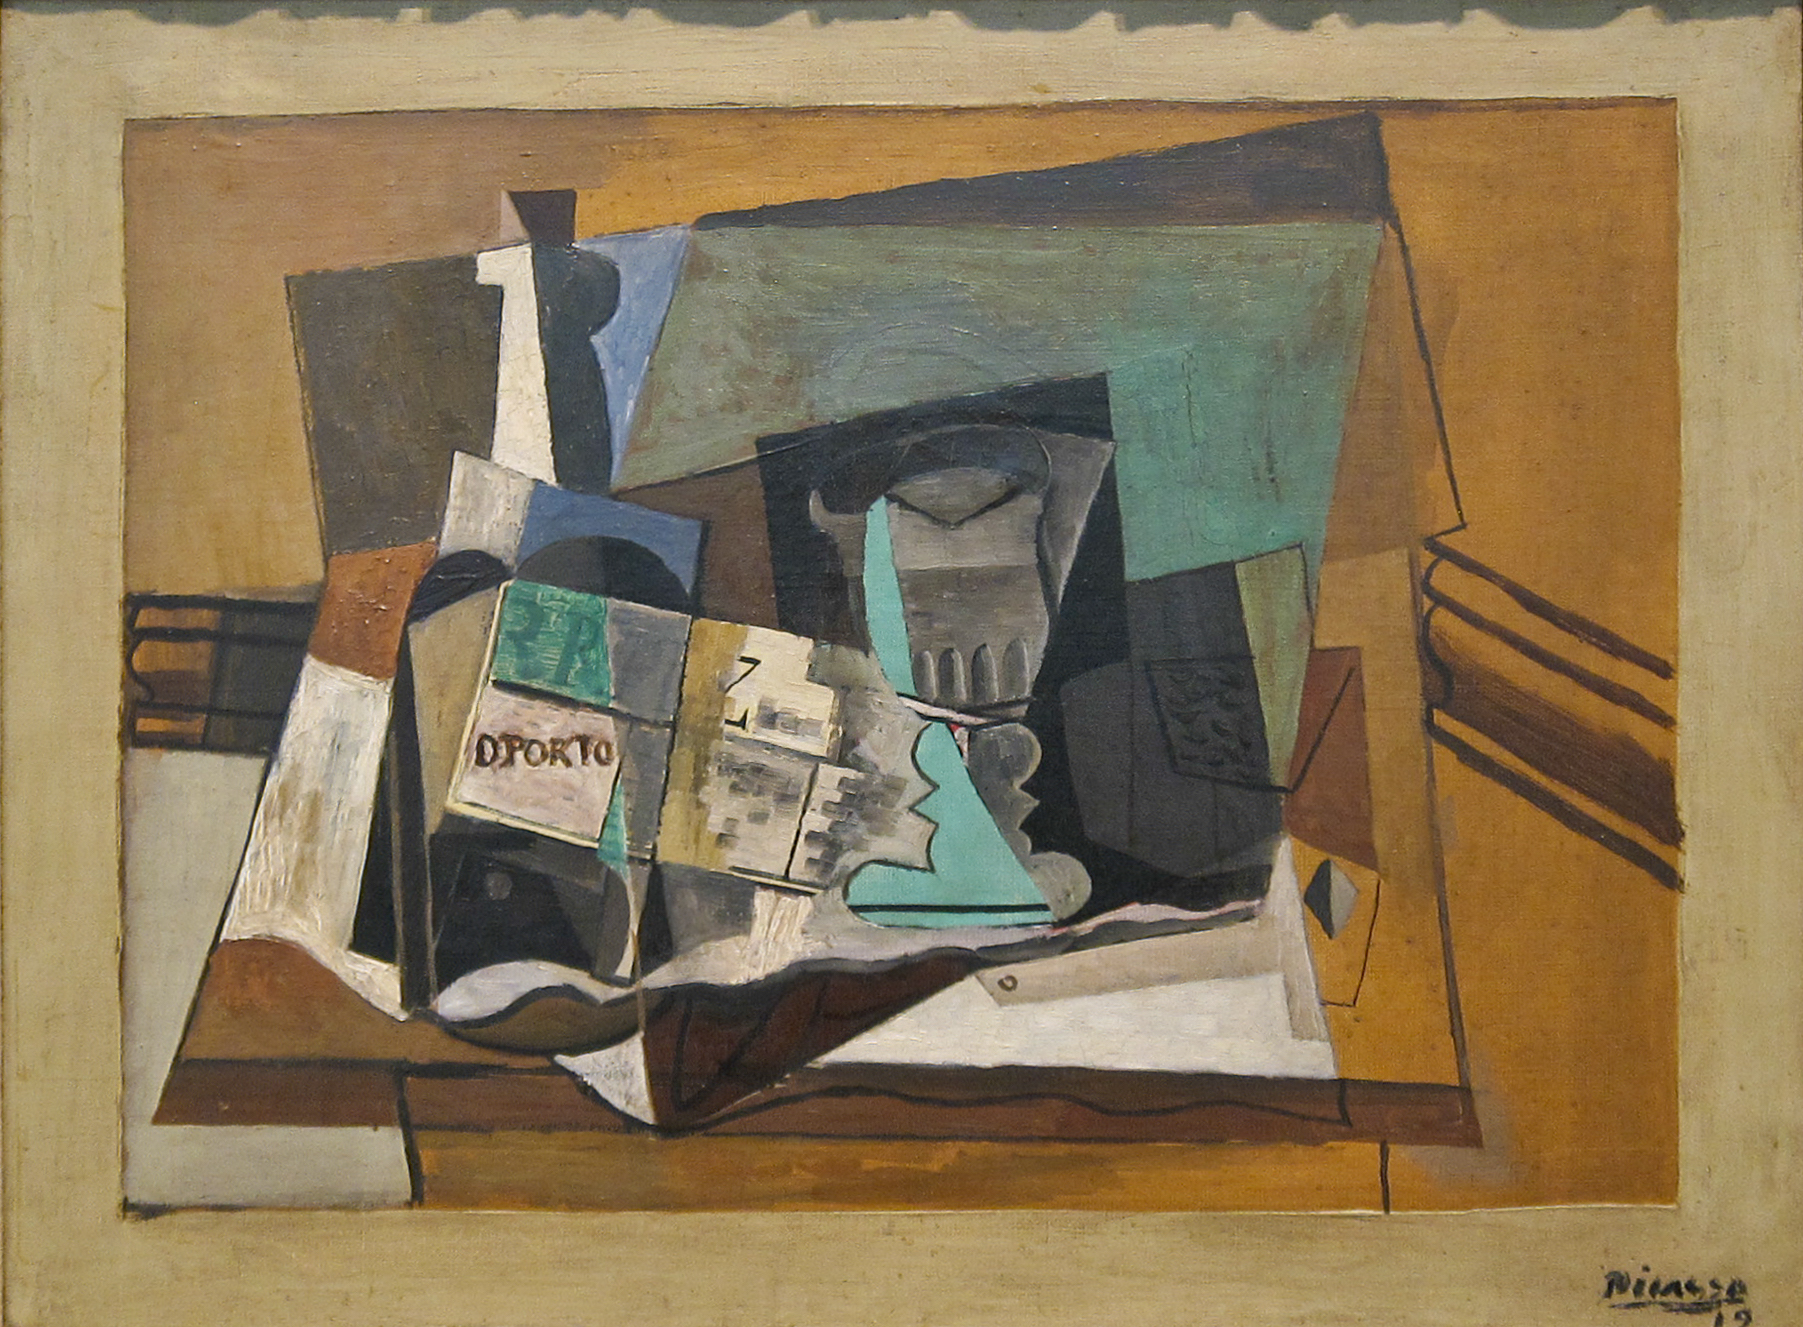 Bottle of Port and Glass by Pablo Picasso - 1919 - 18 x 24 in Dallas Museum of Art